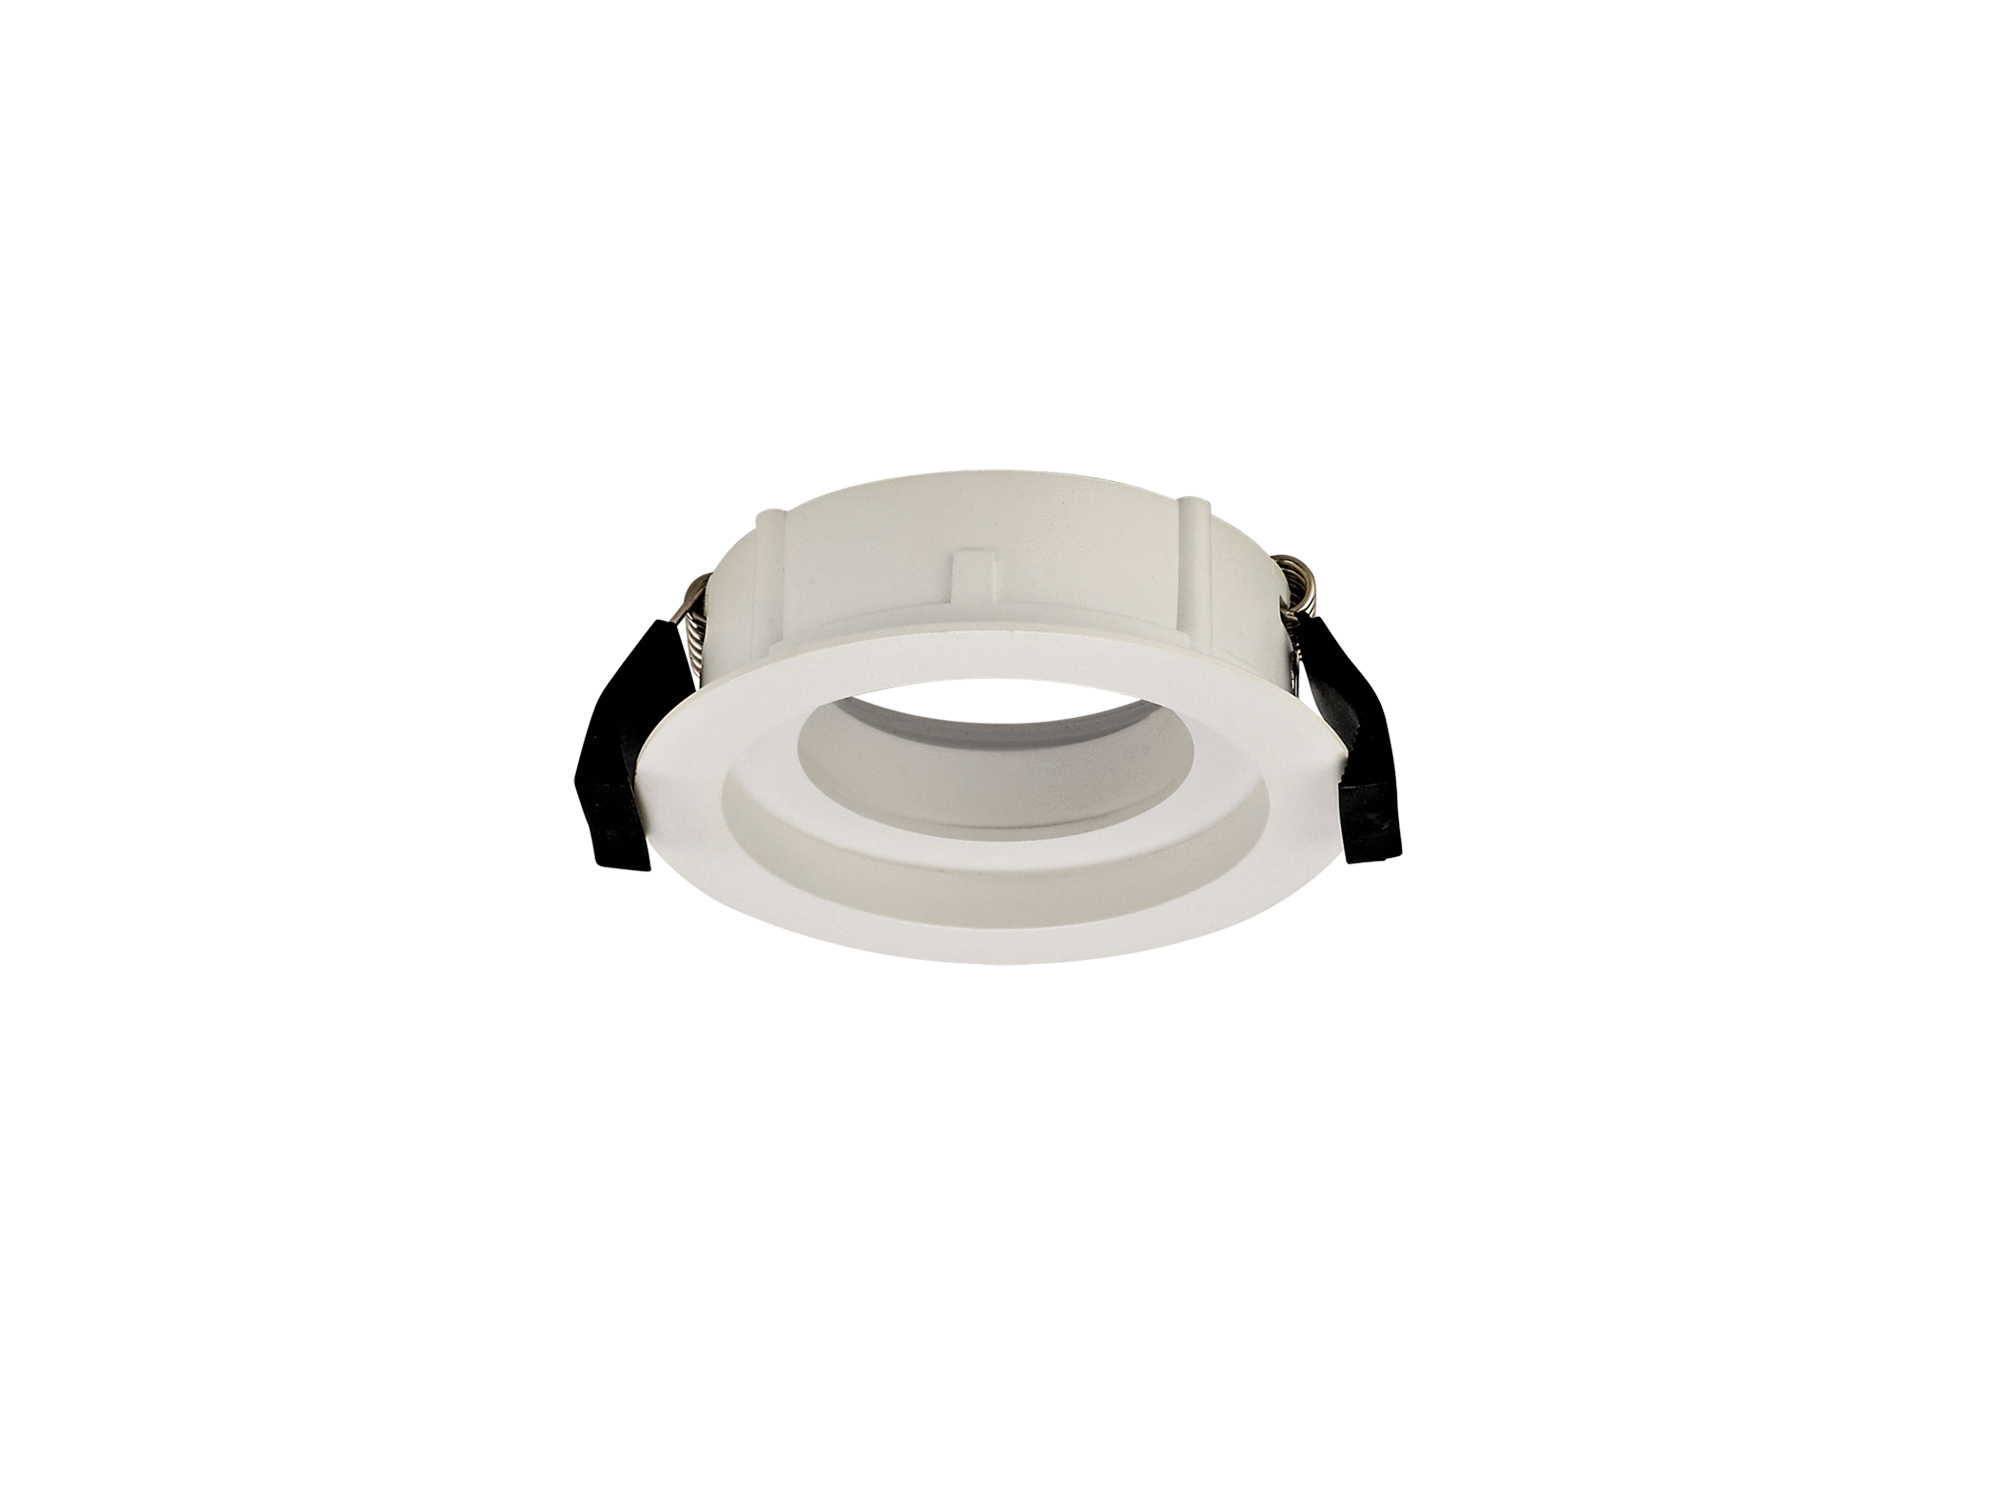 DX200369  Beppe, White Stepped Fixed Recessed Spotlight Frame - LED ENGINE REQUIRED, Dia: 85mm, Cut Out: 76mm, 3yrs Warranty